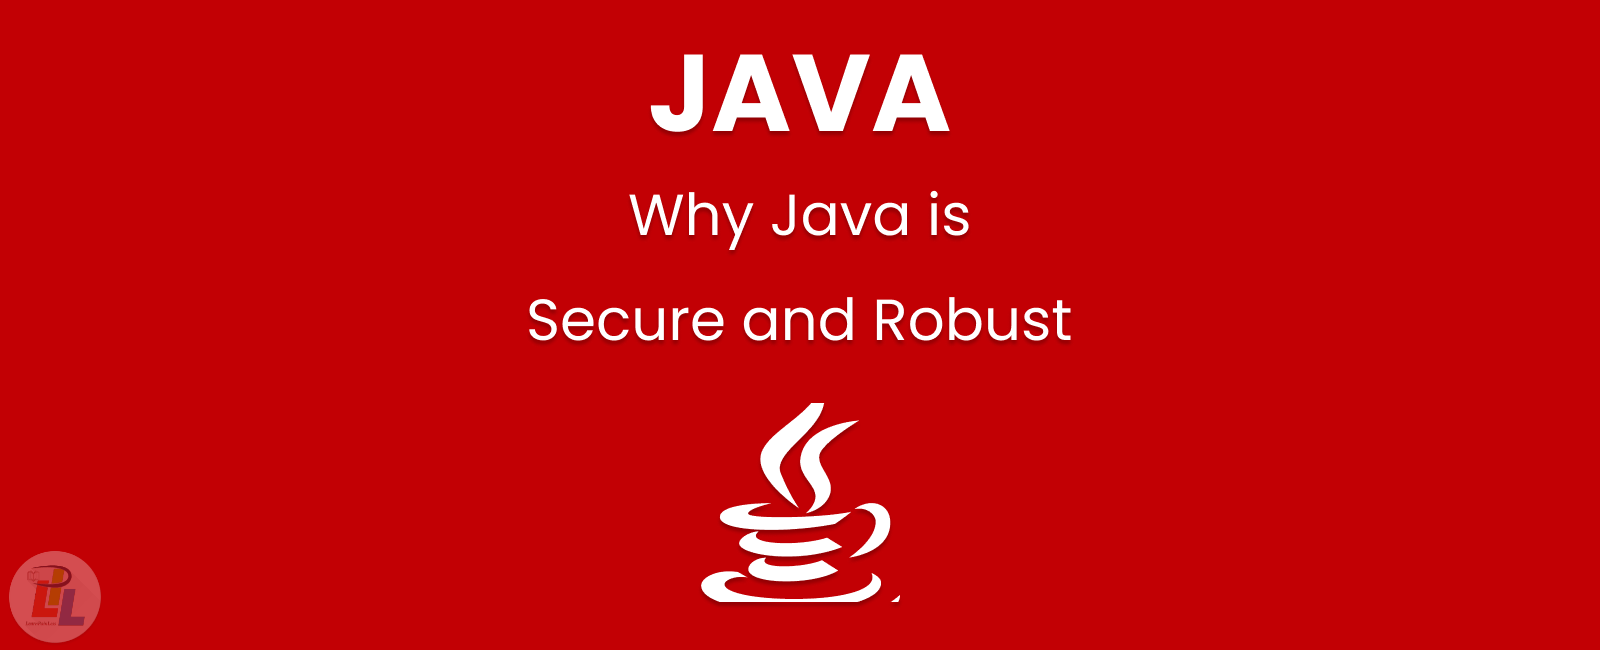 Why Java is Secure and Robust | Robust meaning in java